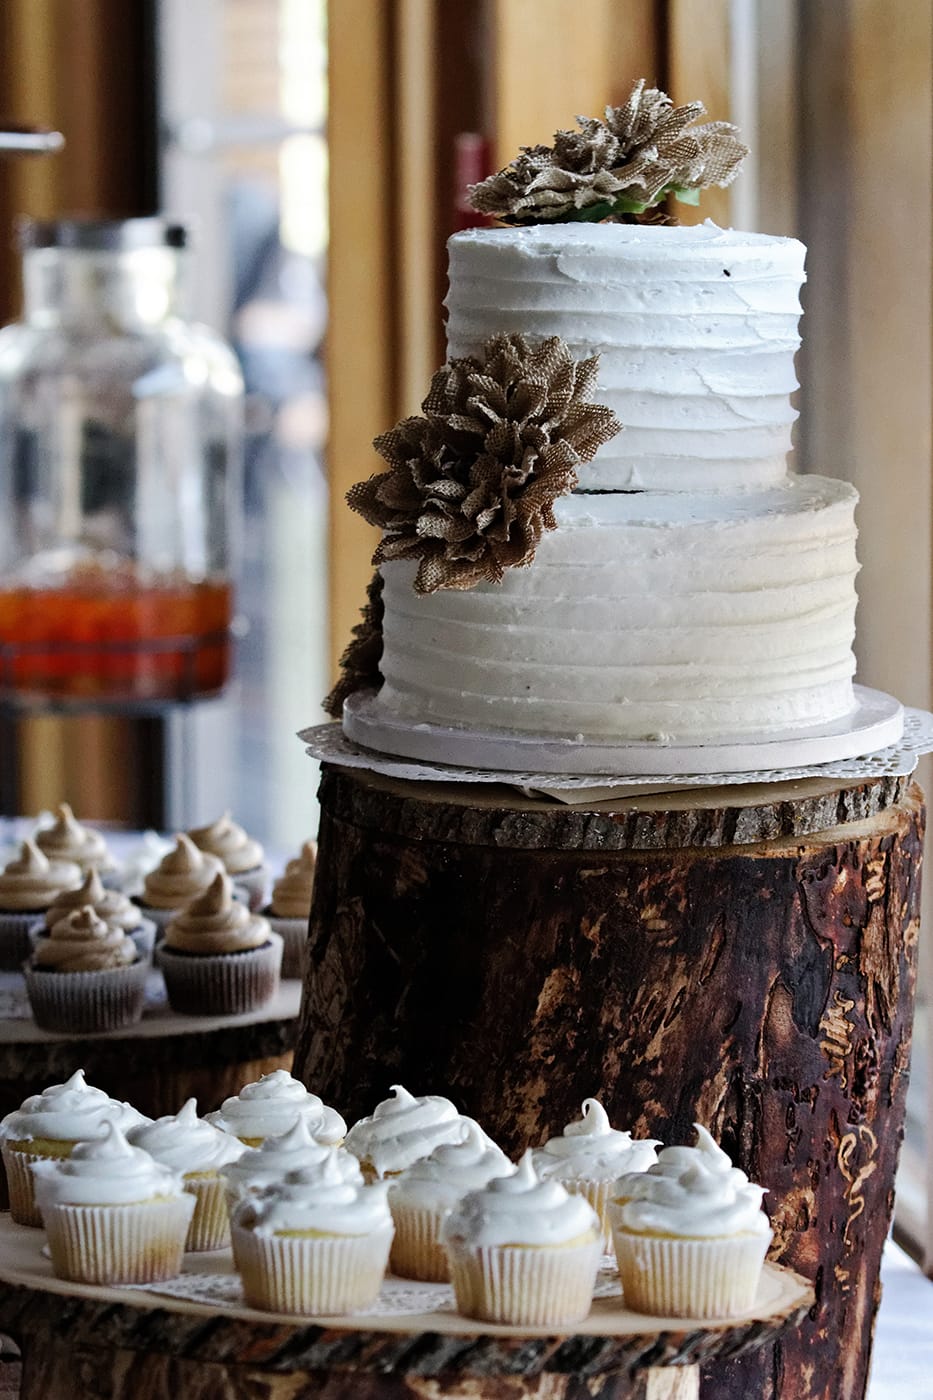 wedding cake on display with other deserts